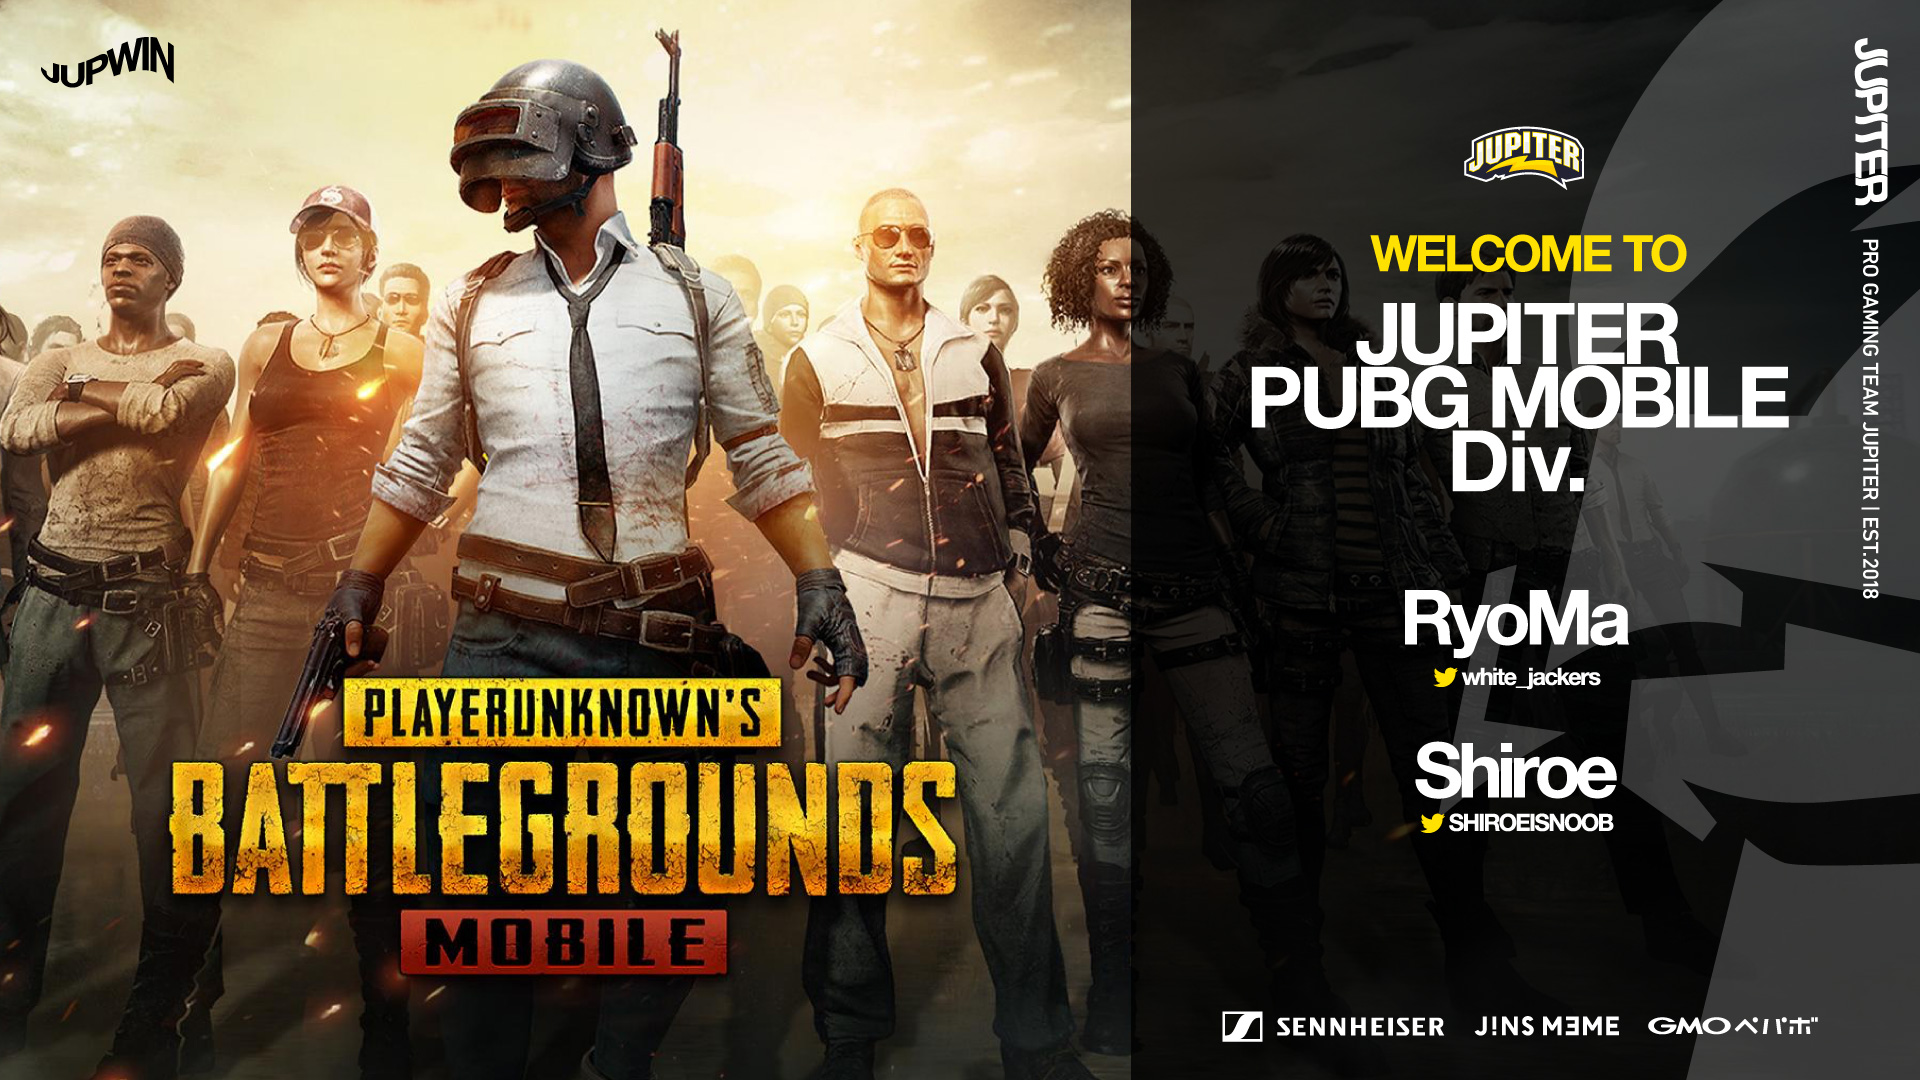 PUBG MOBILE – RyoMa, Shiroe Joined